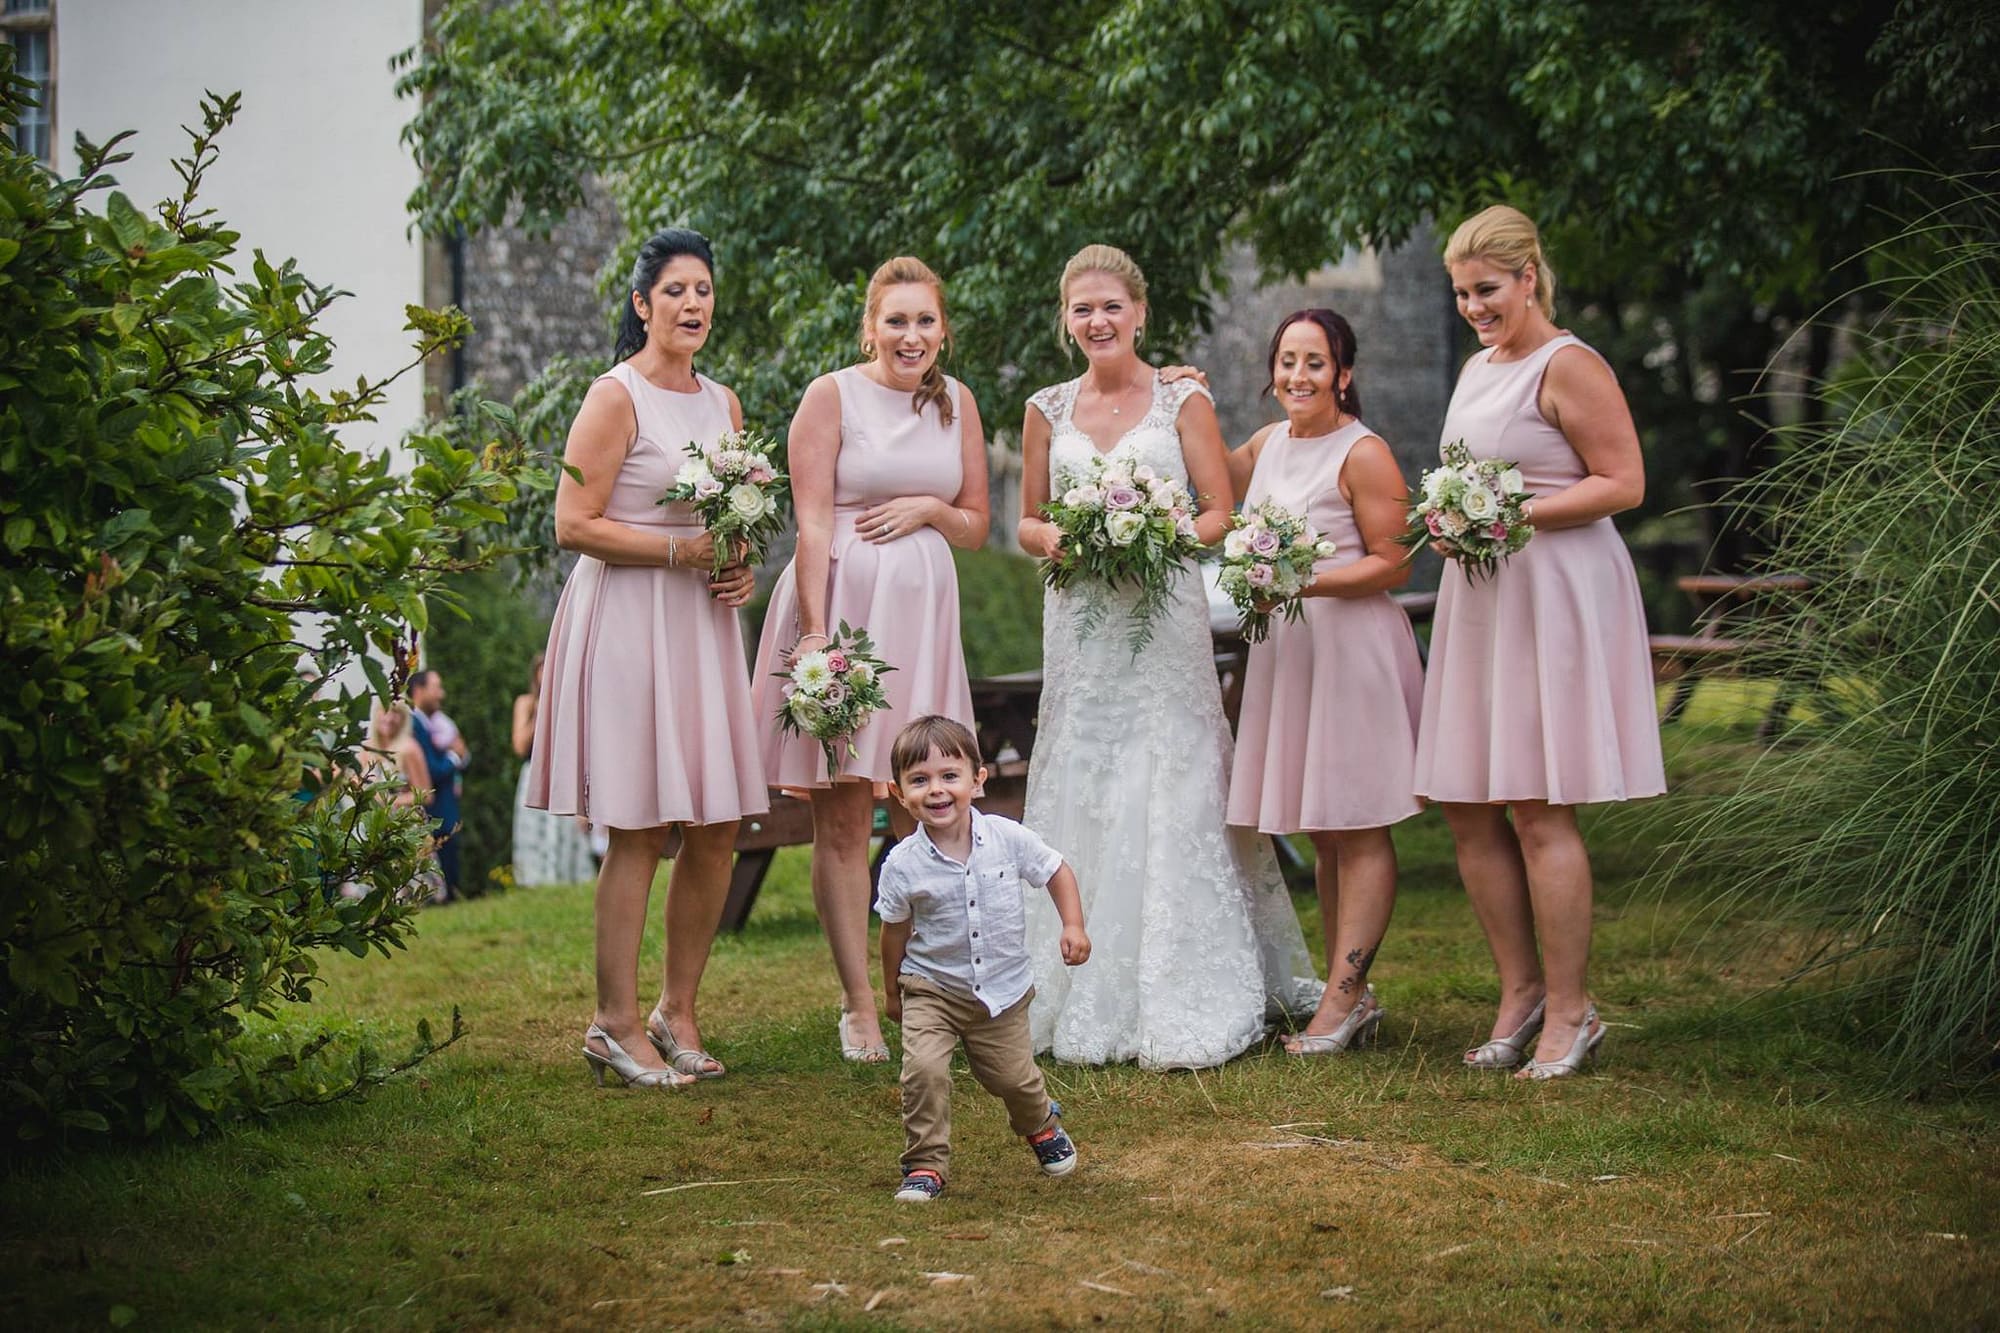 blush bridesmaids dresses and flowers